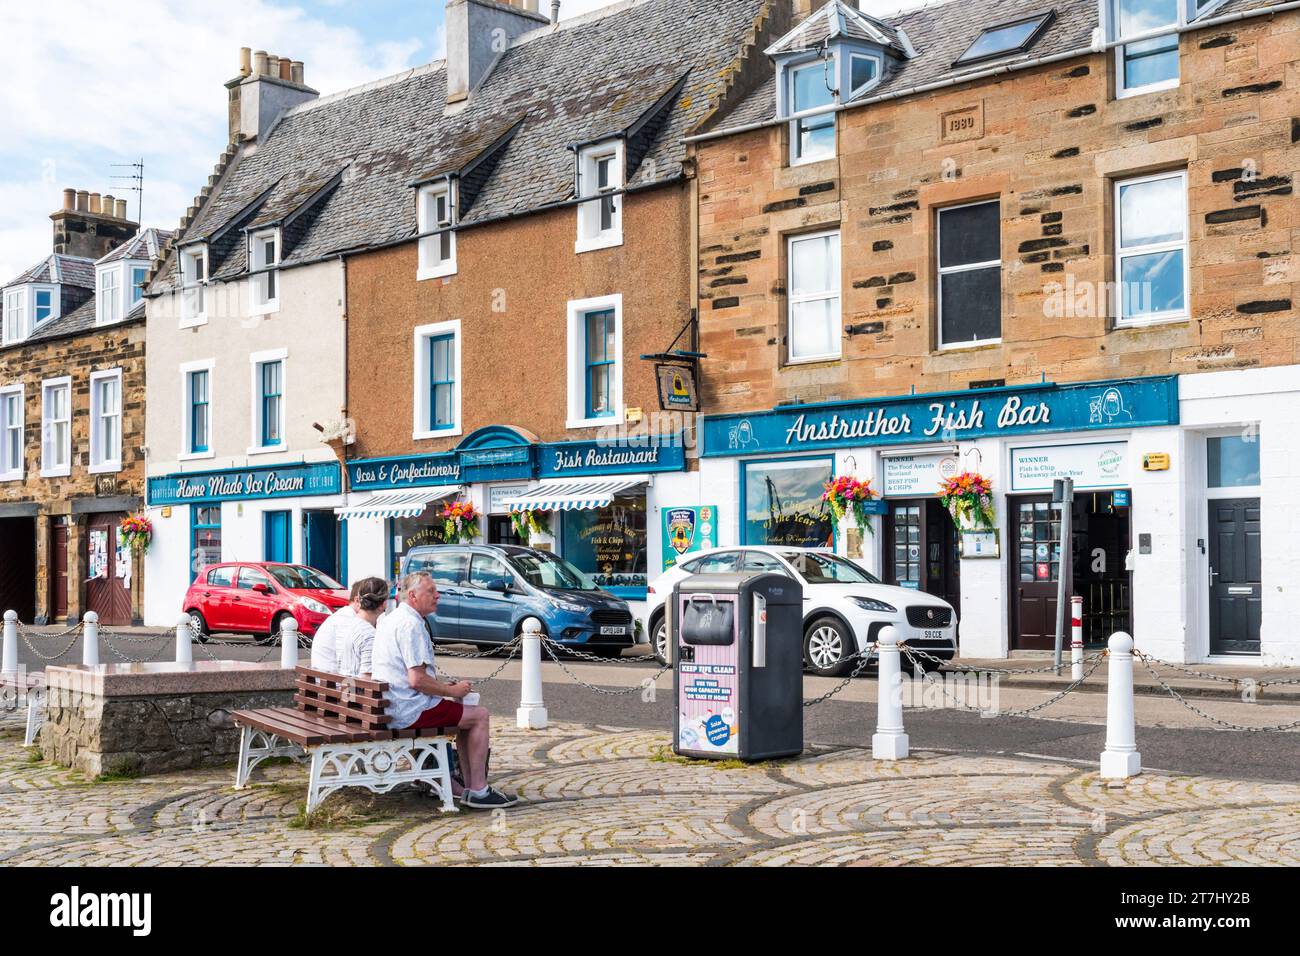 Anstruther Fish Bar dans Shore Street, Anstruther, Fife. Banque D'Images